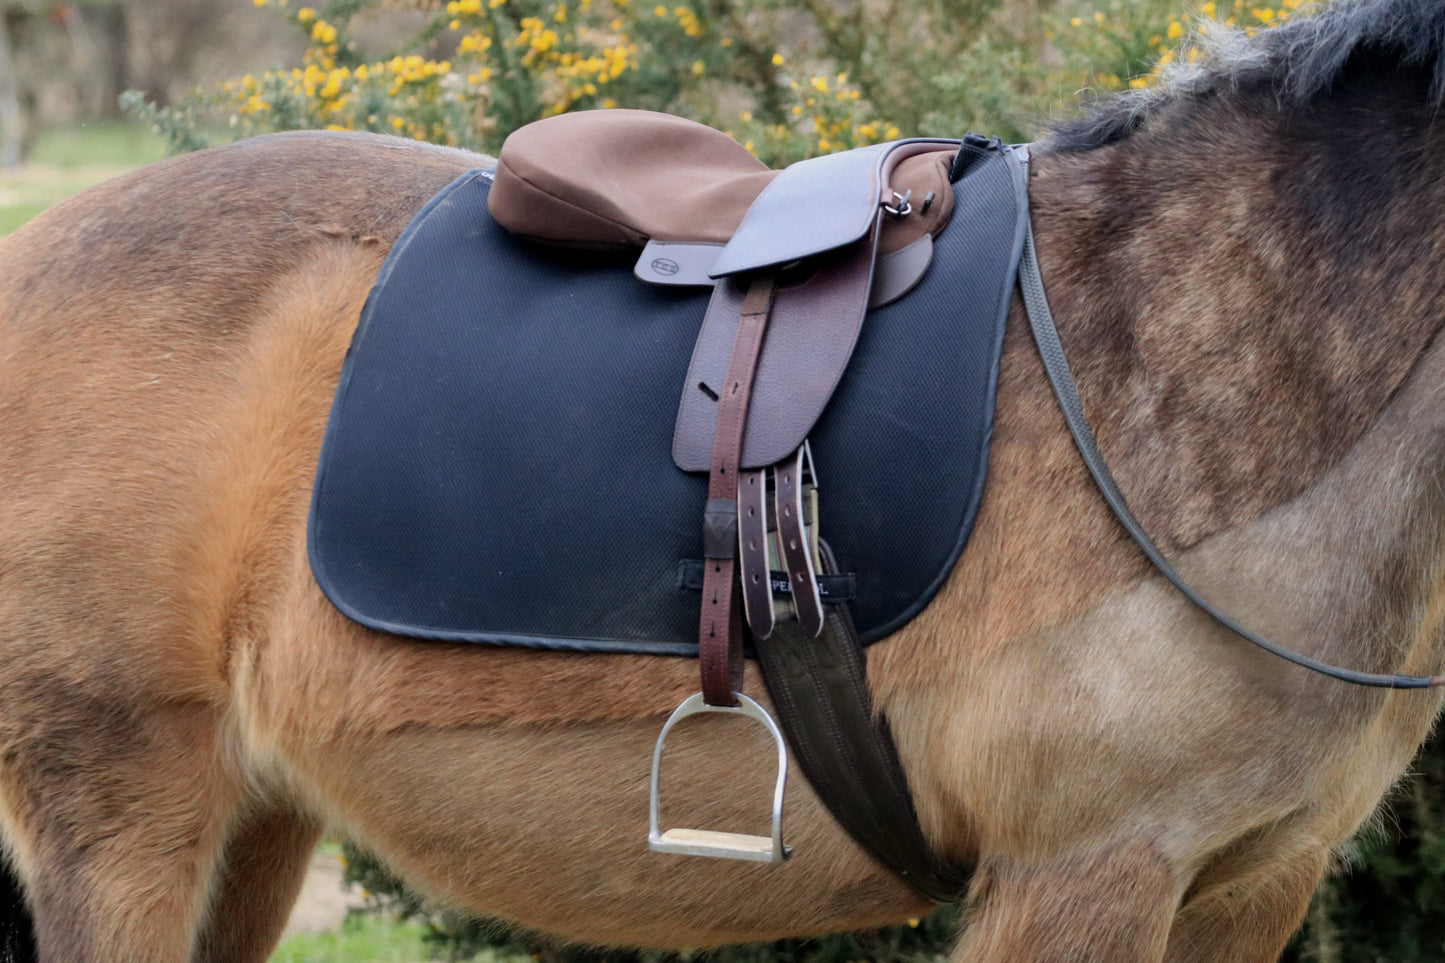 Ex Trial Total Contact Saddle